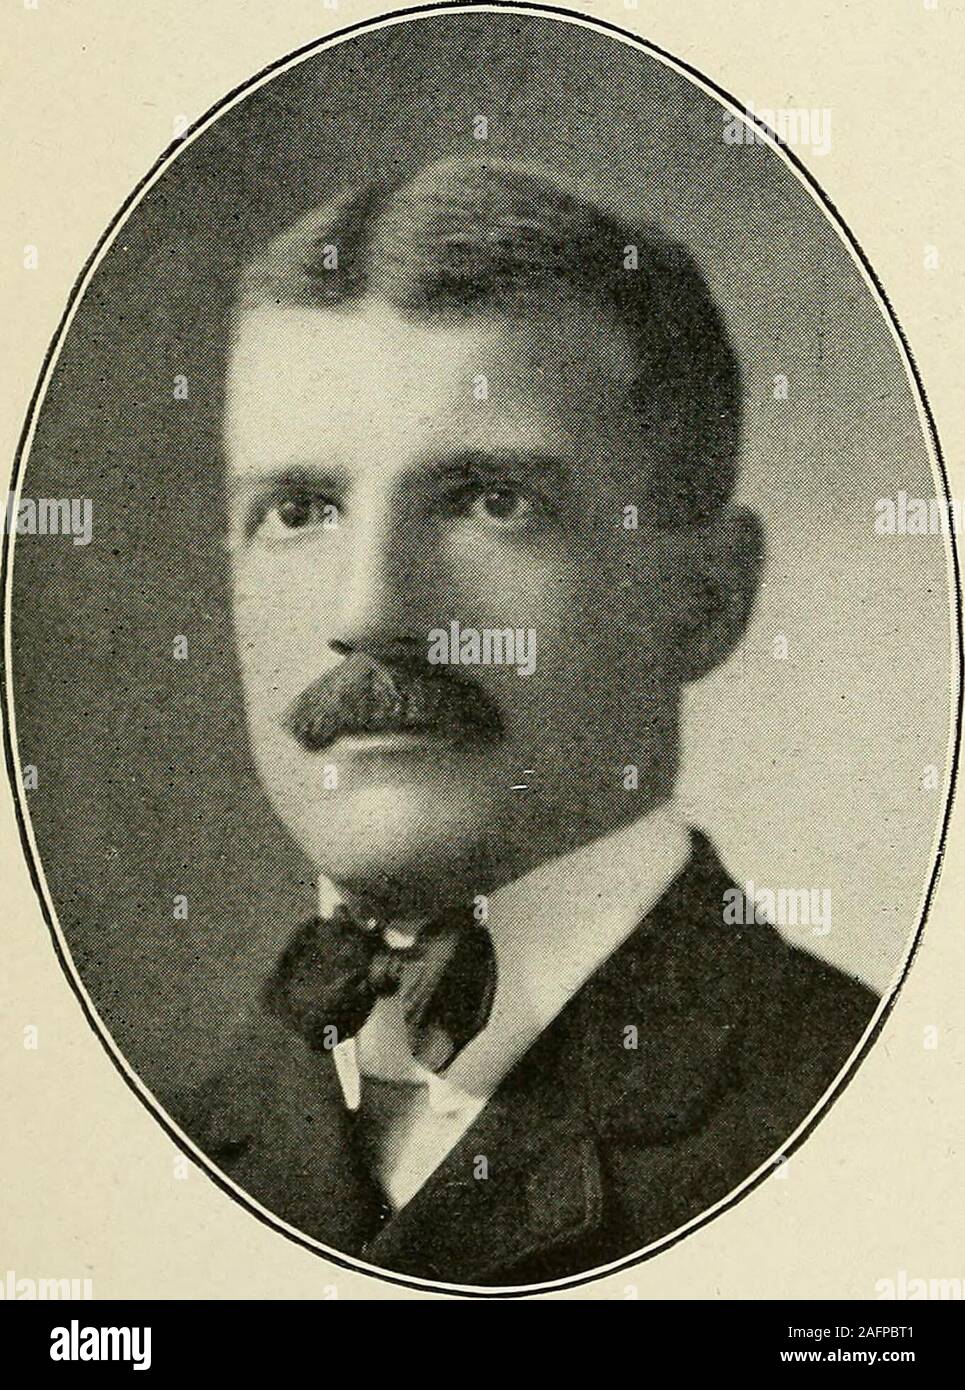 . Men of Minnesota; a collection of the portraits of men prominent in business and professional life in Minnesota. JAMES C. FIFIELD MINNEAPOLIS.KIFlEIvD, FLETCHER & FIFIELD, LAWYERS. WALTER V. FIFIELD MINNEAPOLIS.FIFIELD, FLETCHER & FIFIELD, LAWYERS.. MILTON D. PURDY MINNEAPOLIS.lawyer; U. S. district ATTORNEY (19OI-O2). Stock Photo